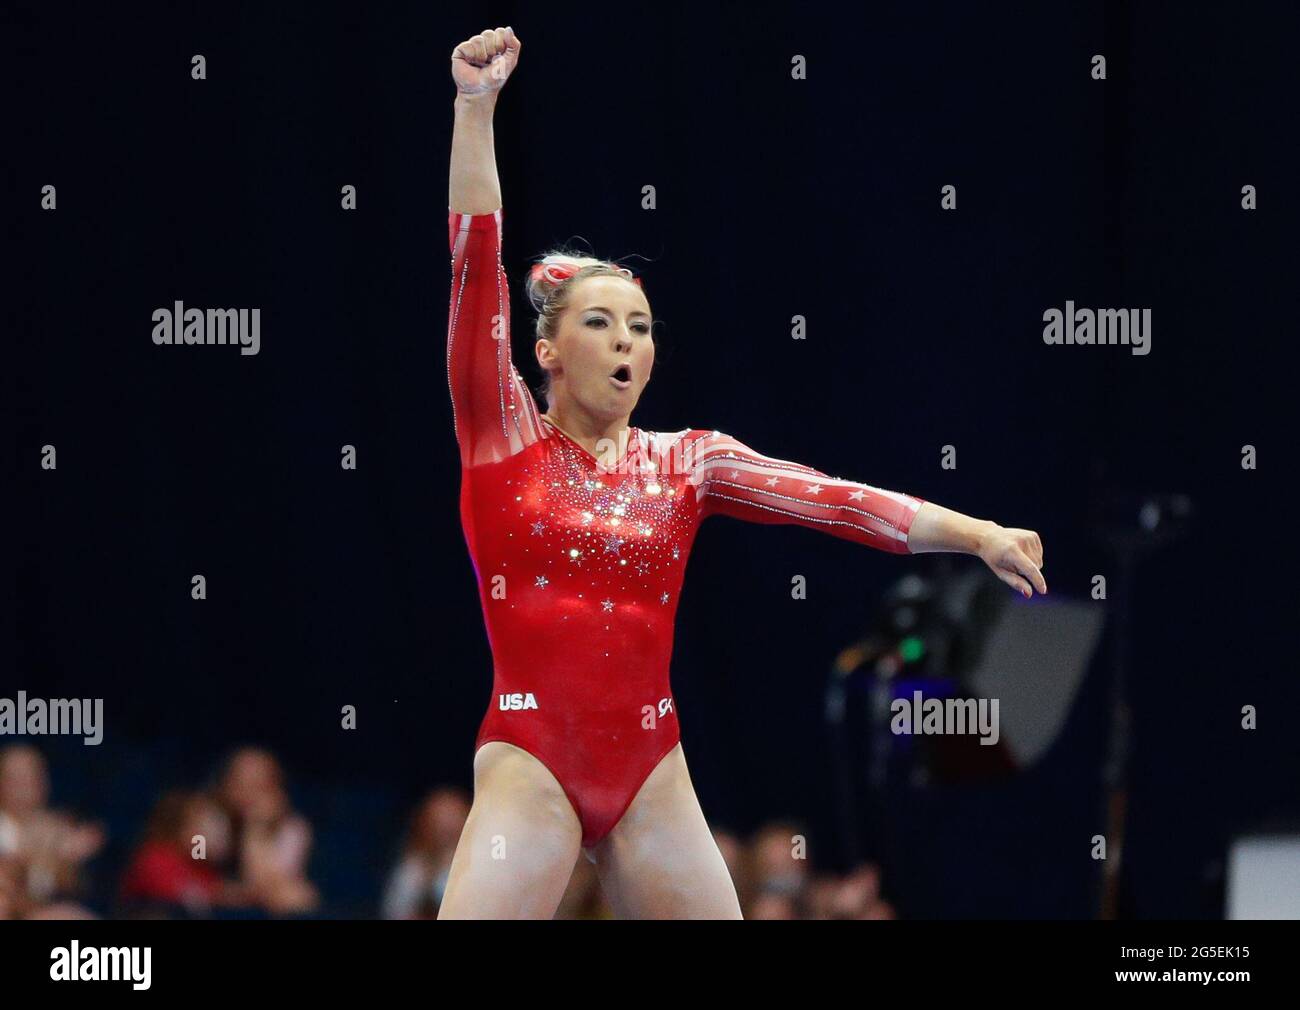 June 25, 2021: MyKayla Skinner celebrates her beam landing during Day 1 of the 2021 U.S. Women's Gymnastics Olympic Team Trials at the Dome at America's Center in St. Louis, MO. Kyle Okita/CSM Stock Photo